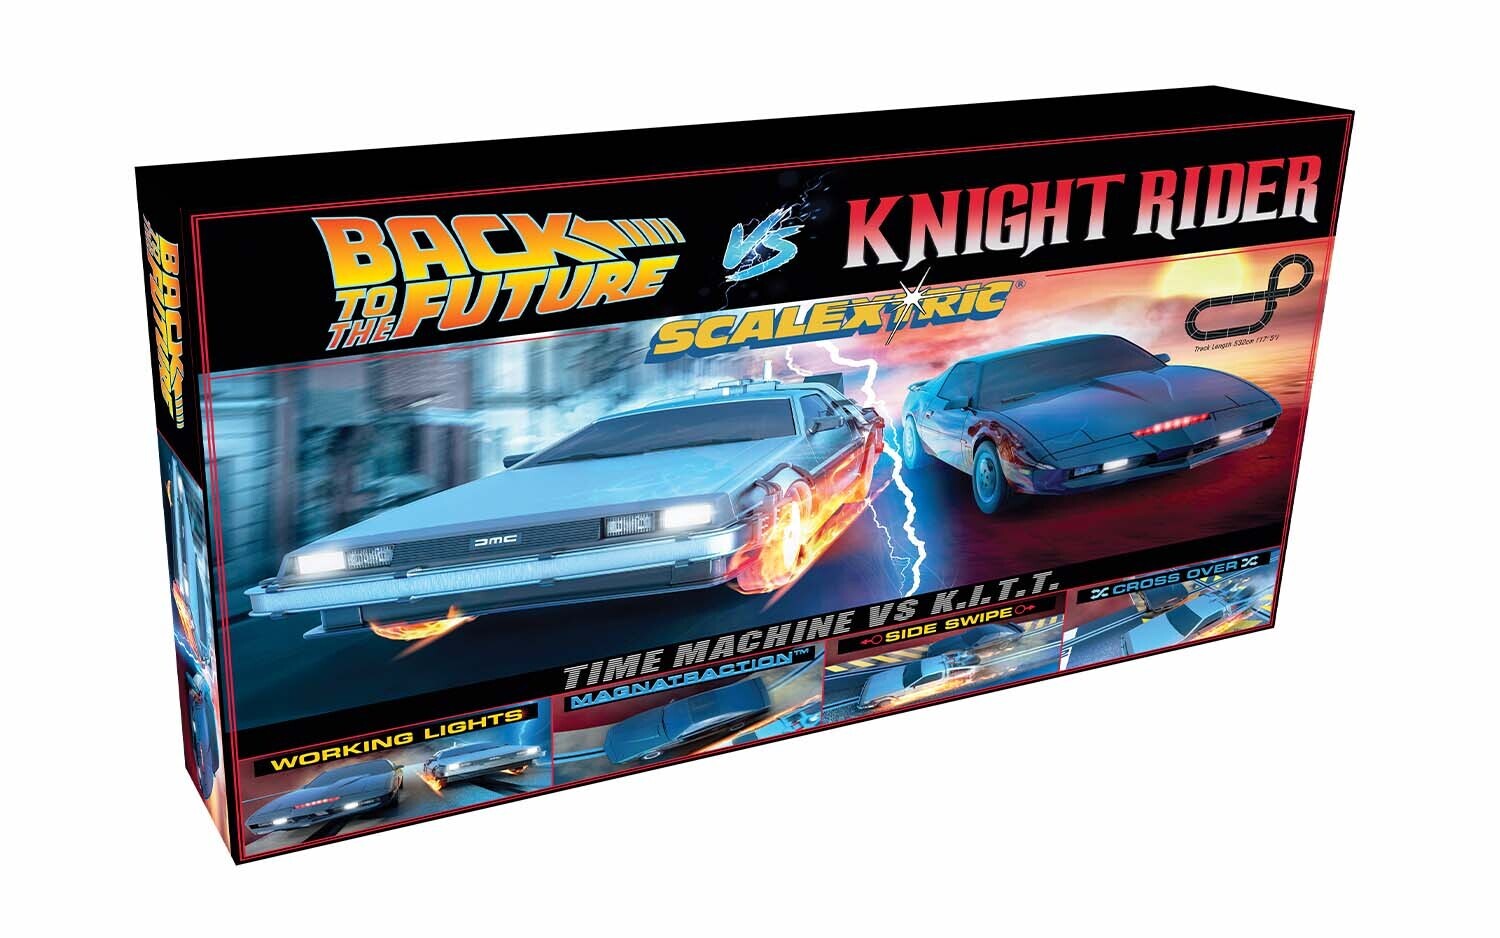 SCALEXTRICTRIC Back to the Future vs Knight Rider Slot Car Set - 35-C1431S